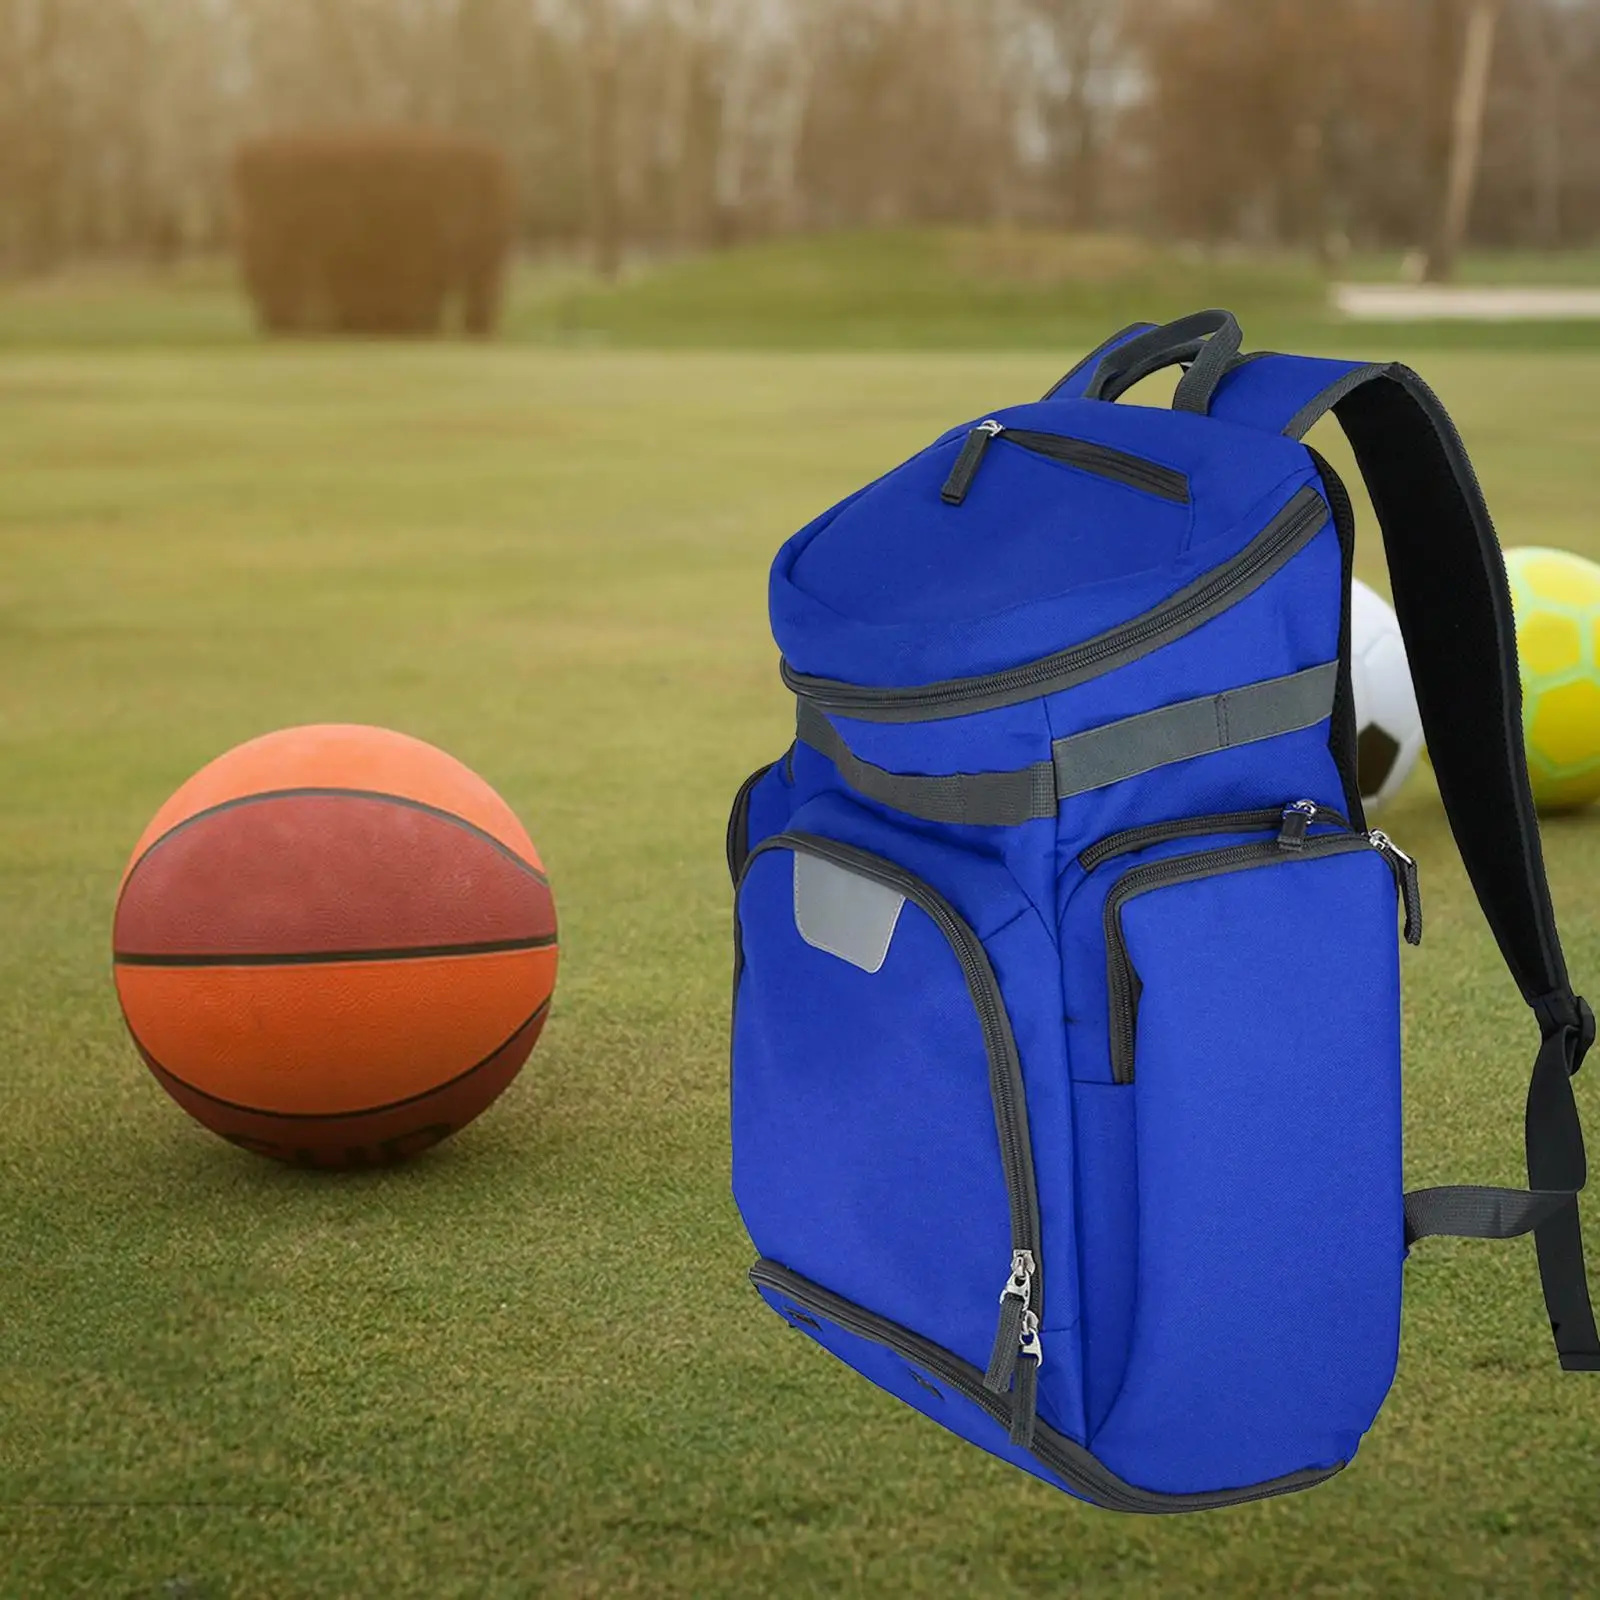 Basketball Soccer Backpack Gym Bag with Shoe and Ball Compartment Sport Bag for Boys Girls Durable Volleyball Bag Large Capacity